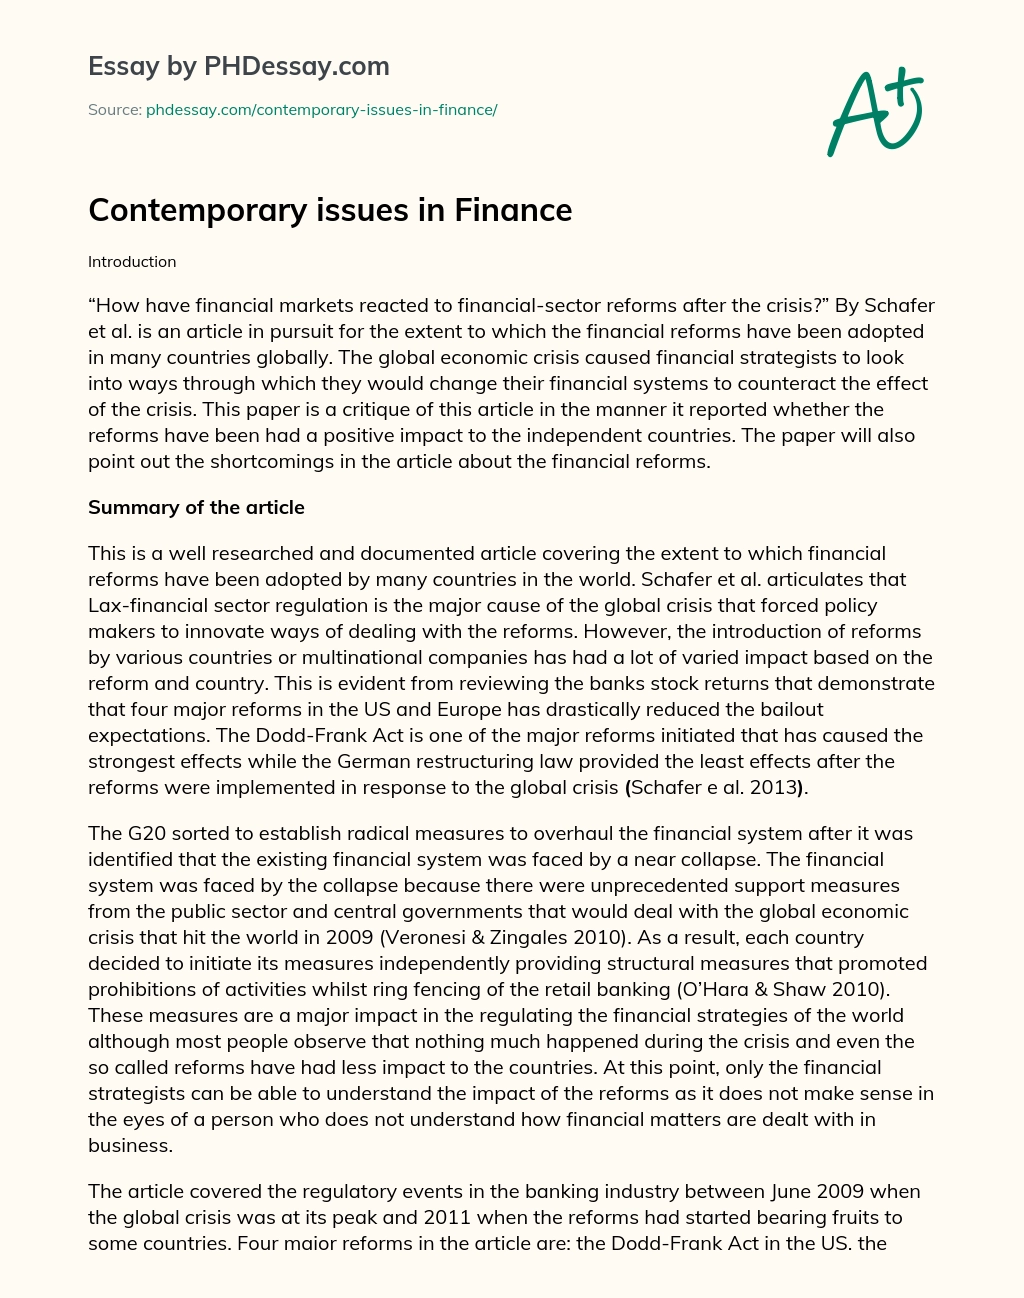 Contemporary issues in Finance essay